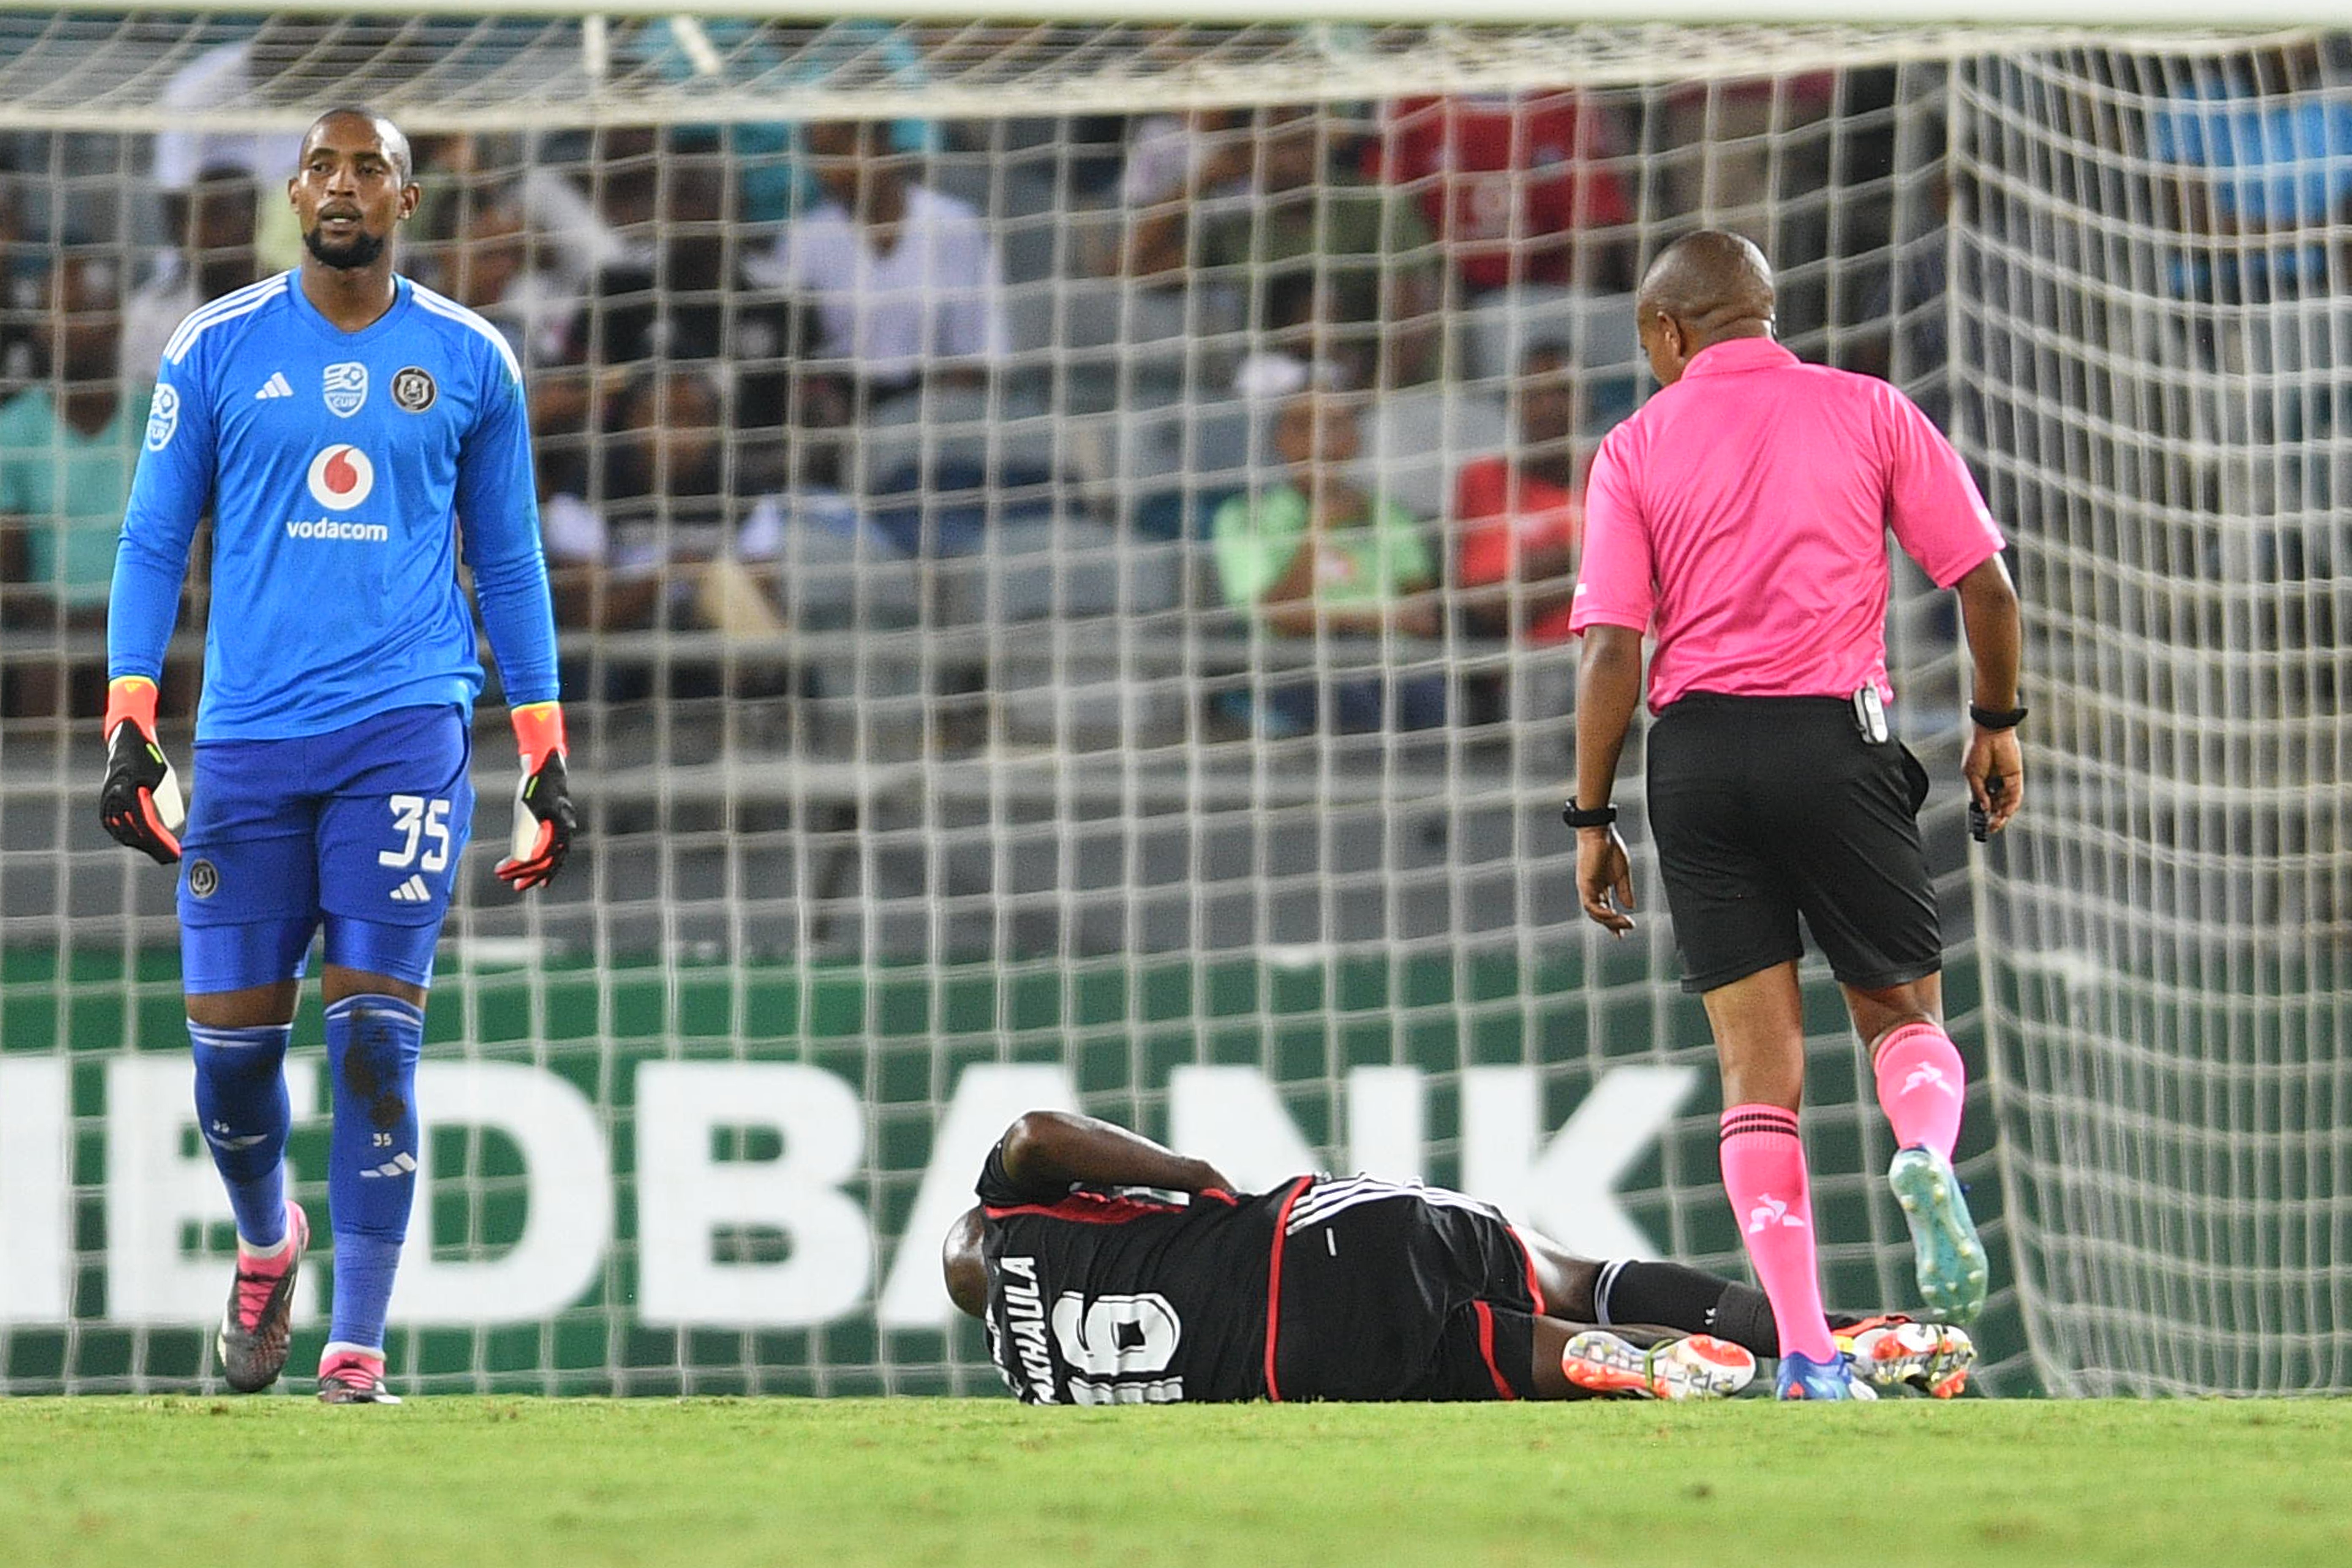 Makhaula scare! What really happened to Pirates midfielder...